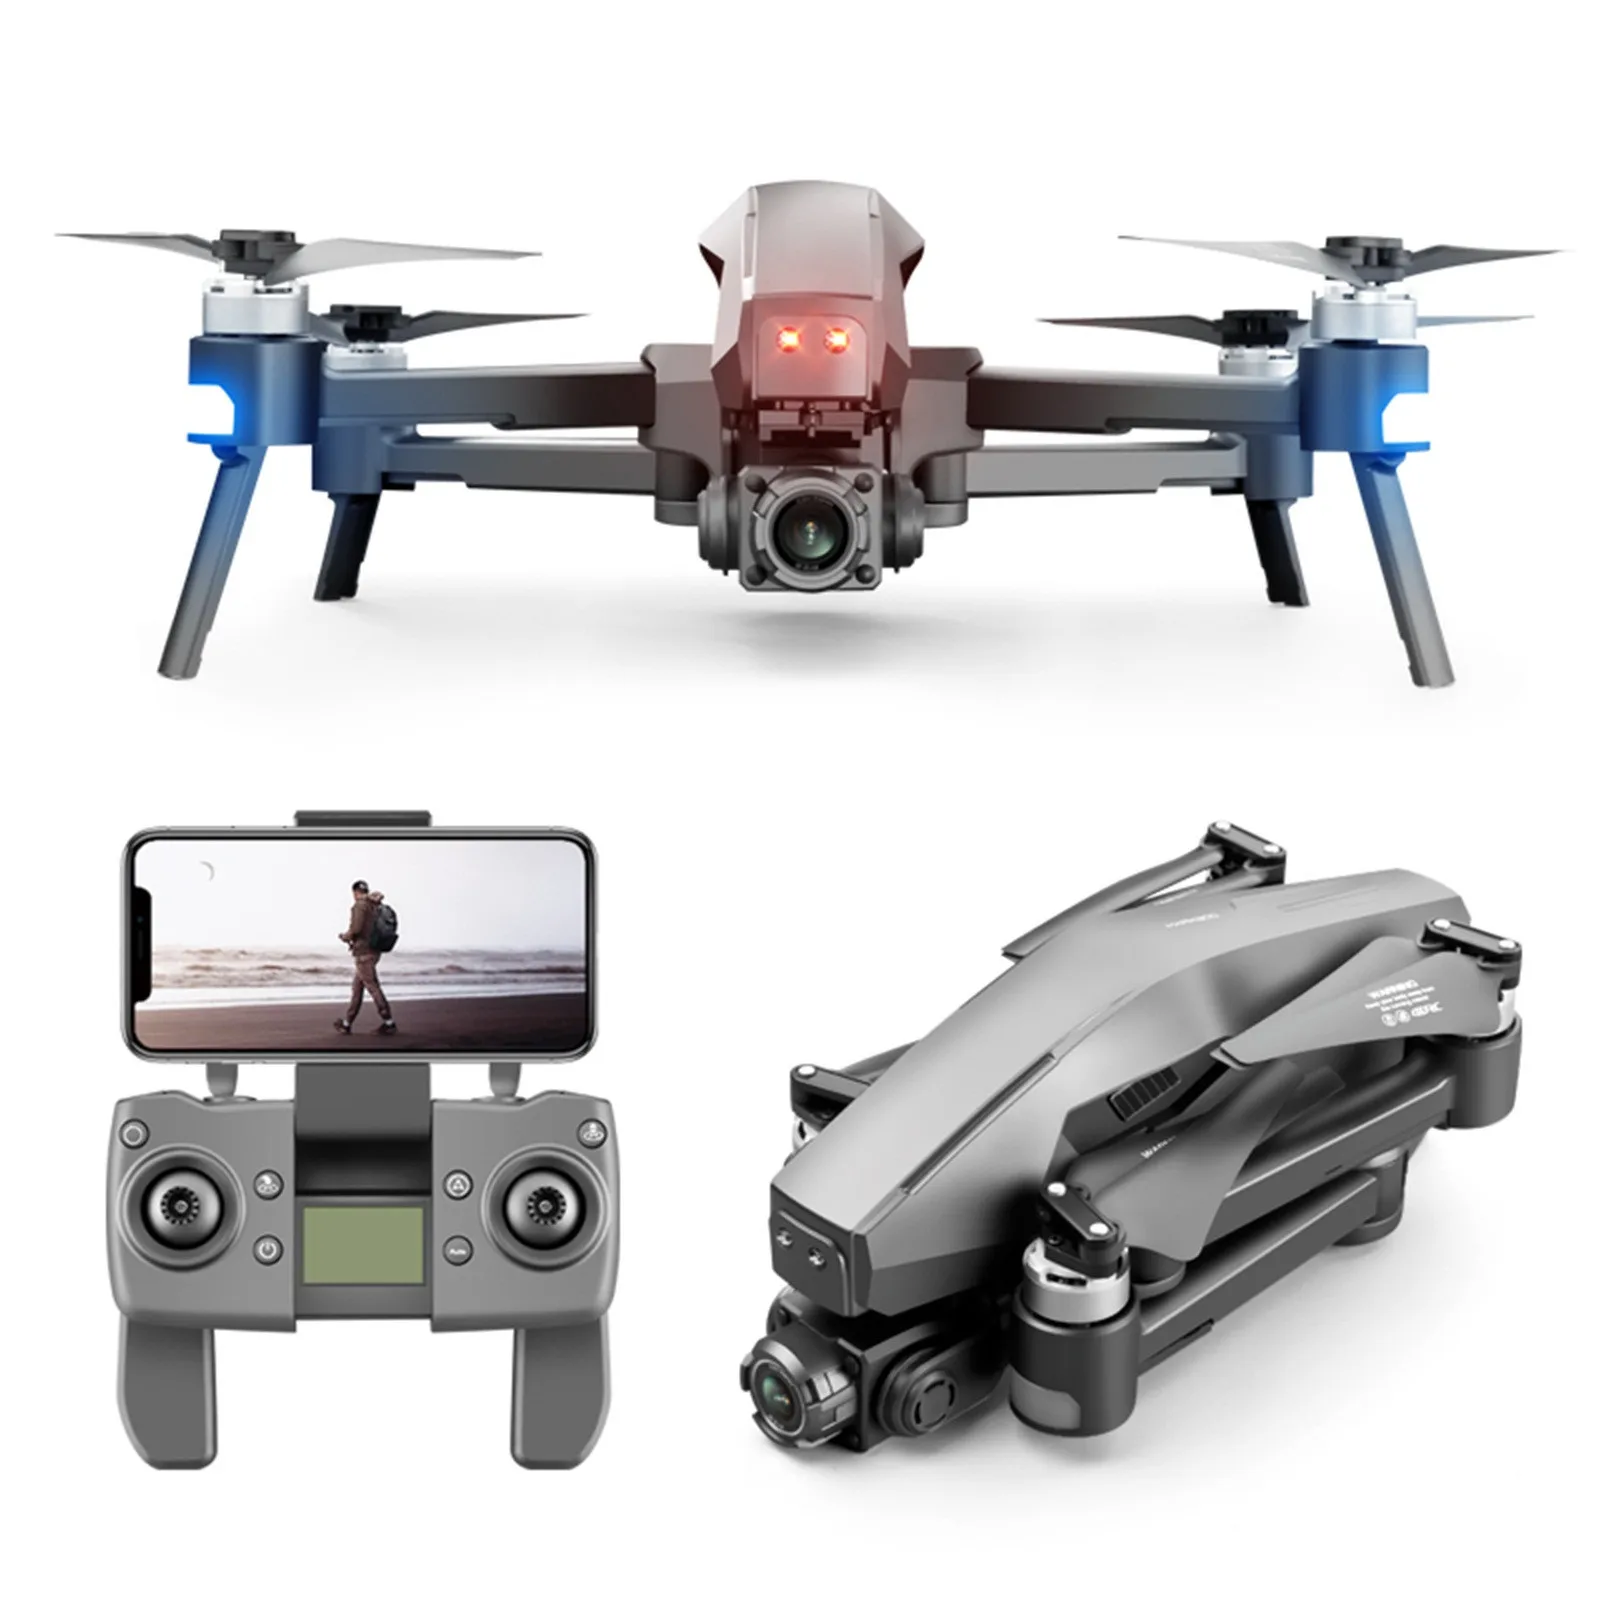 

2021 M1 Pro 2 Drone 4k HD Mechanical 2-Axis Gimbal Camera 5G Wifi Gps System Supports TF Card Drones Distance 1.6km